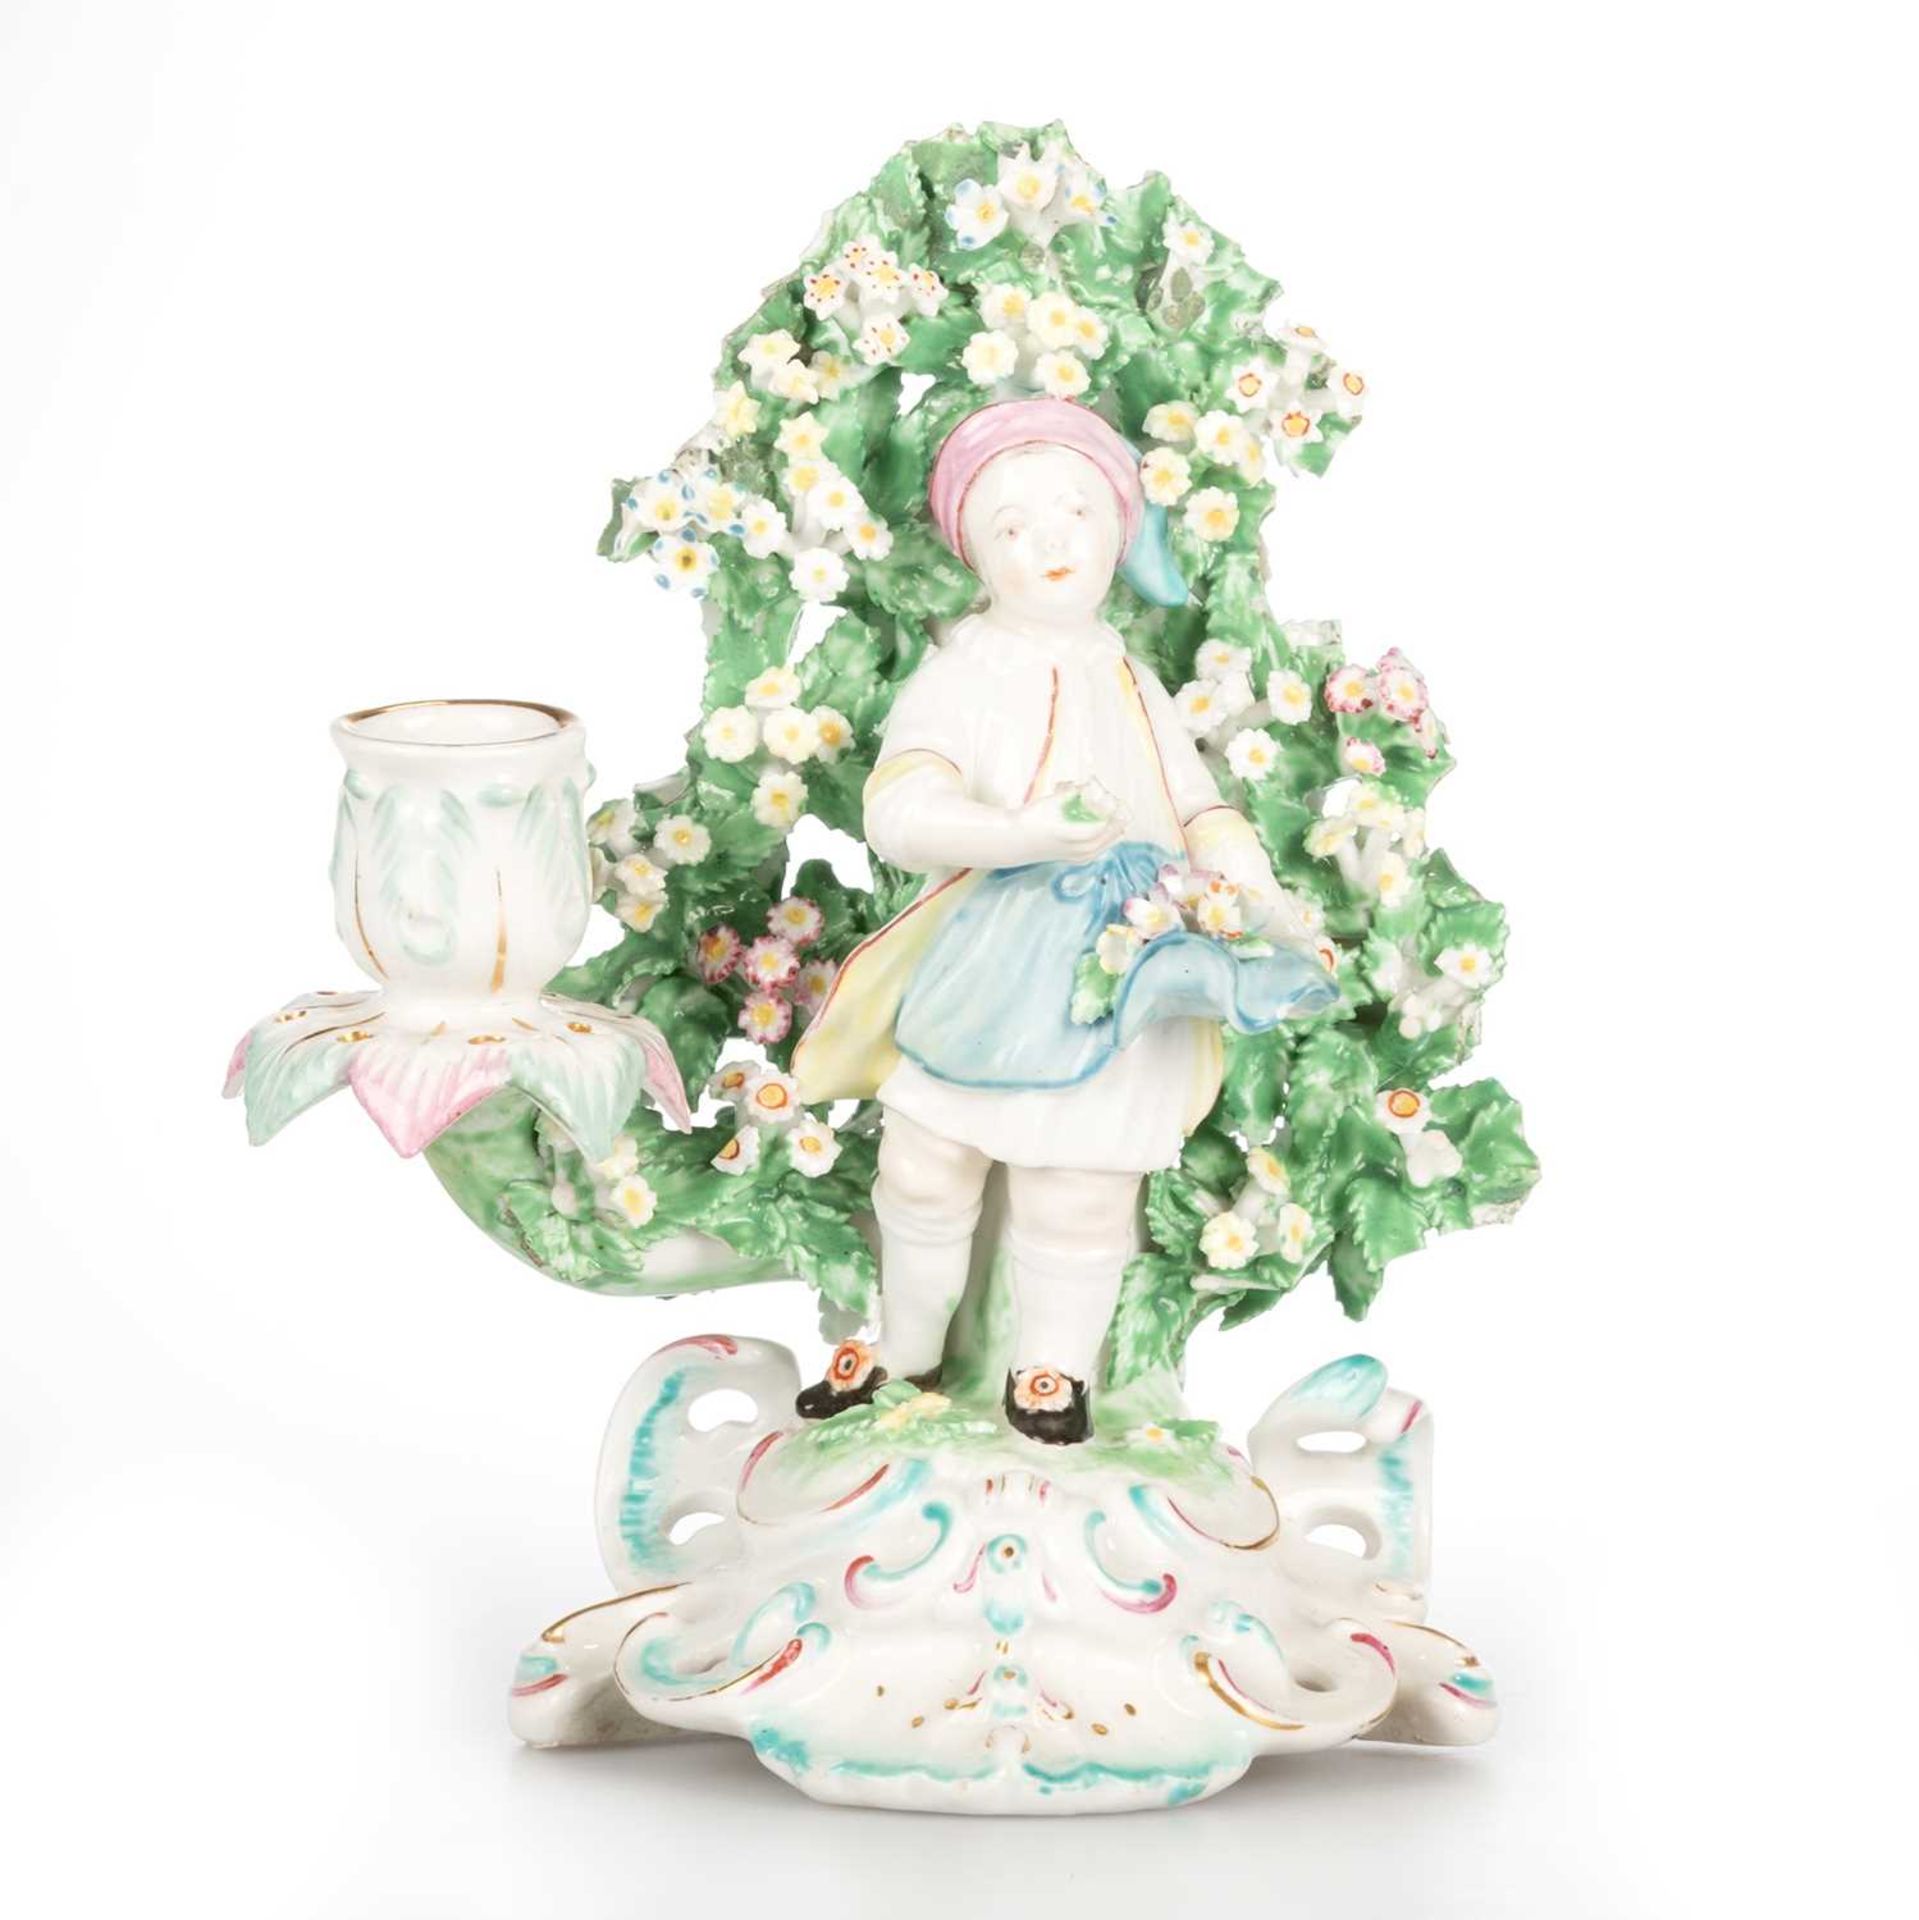 A PAIR OF DERBY PORCELAIN BOCAGE CANDLESTICKS, CIRCA 1765 - Image 2 of 5